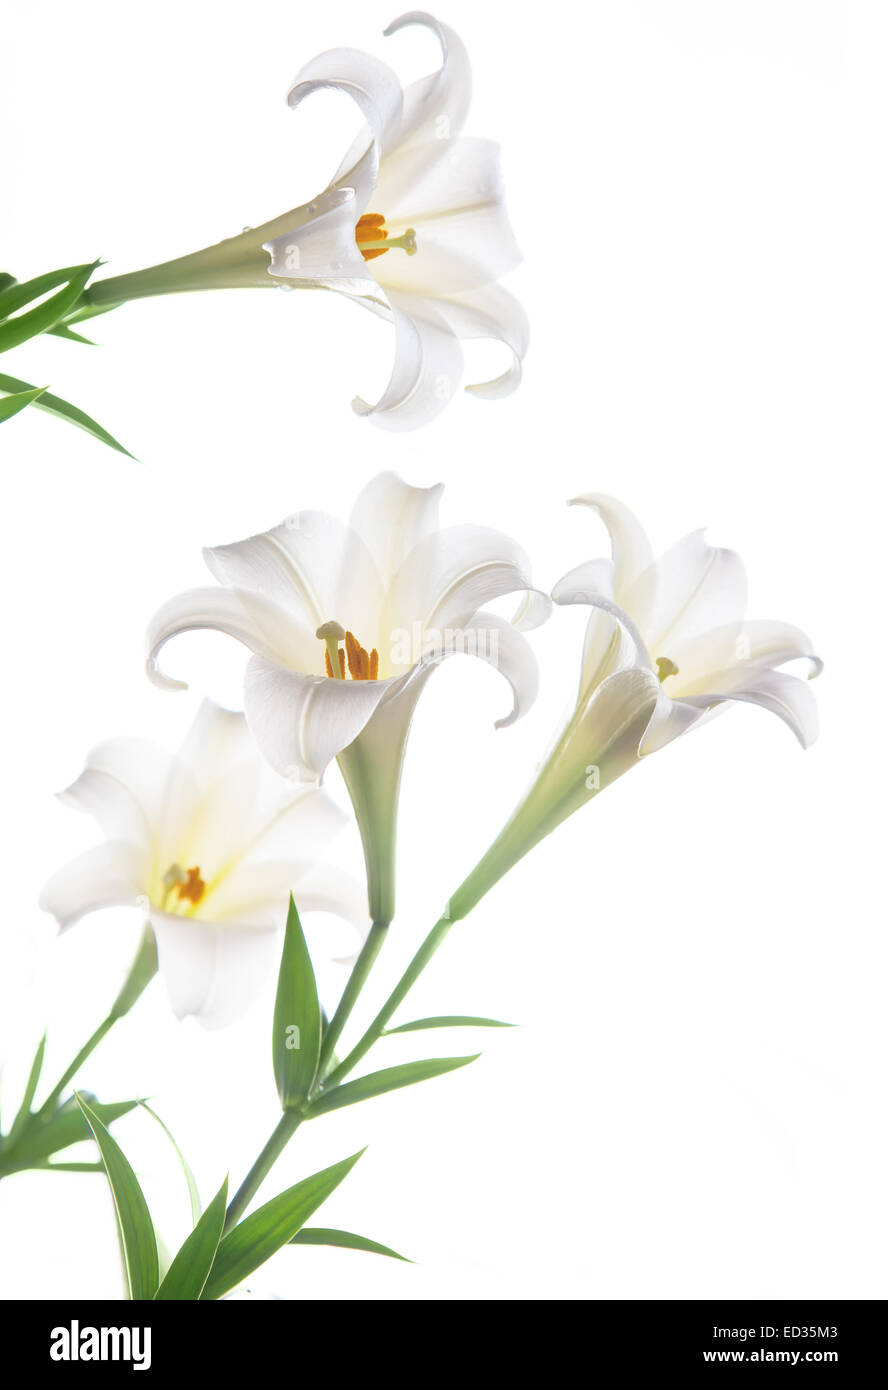 The blooming white lily after rain on the white backgroup Stock Photo